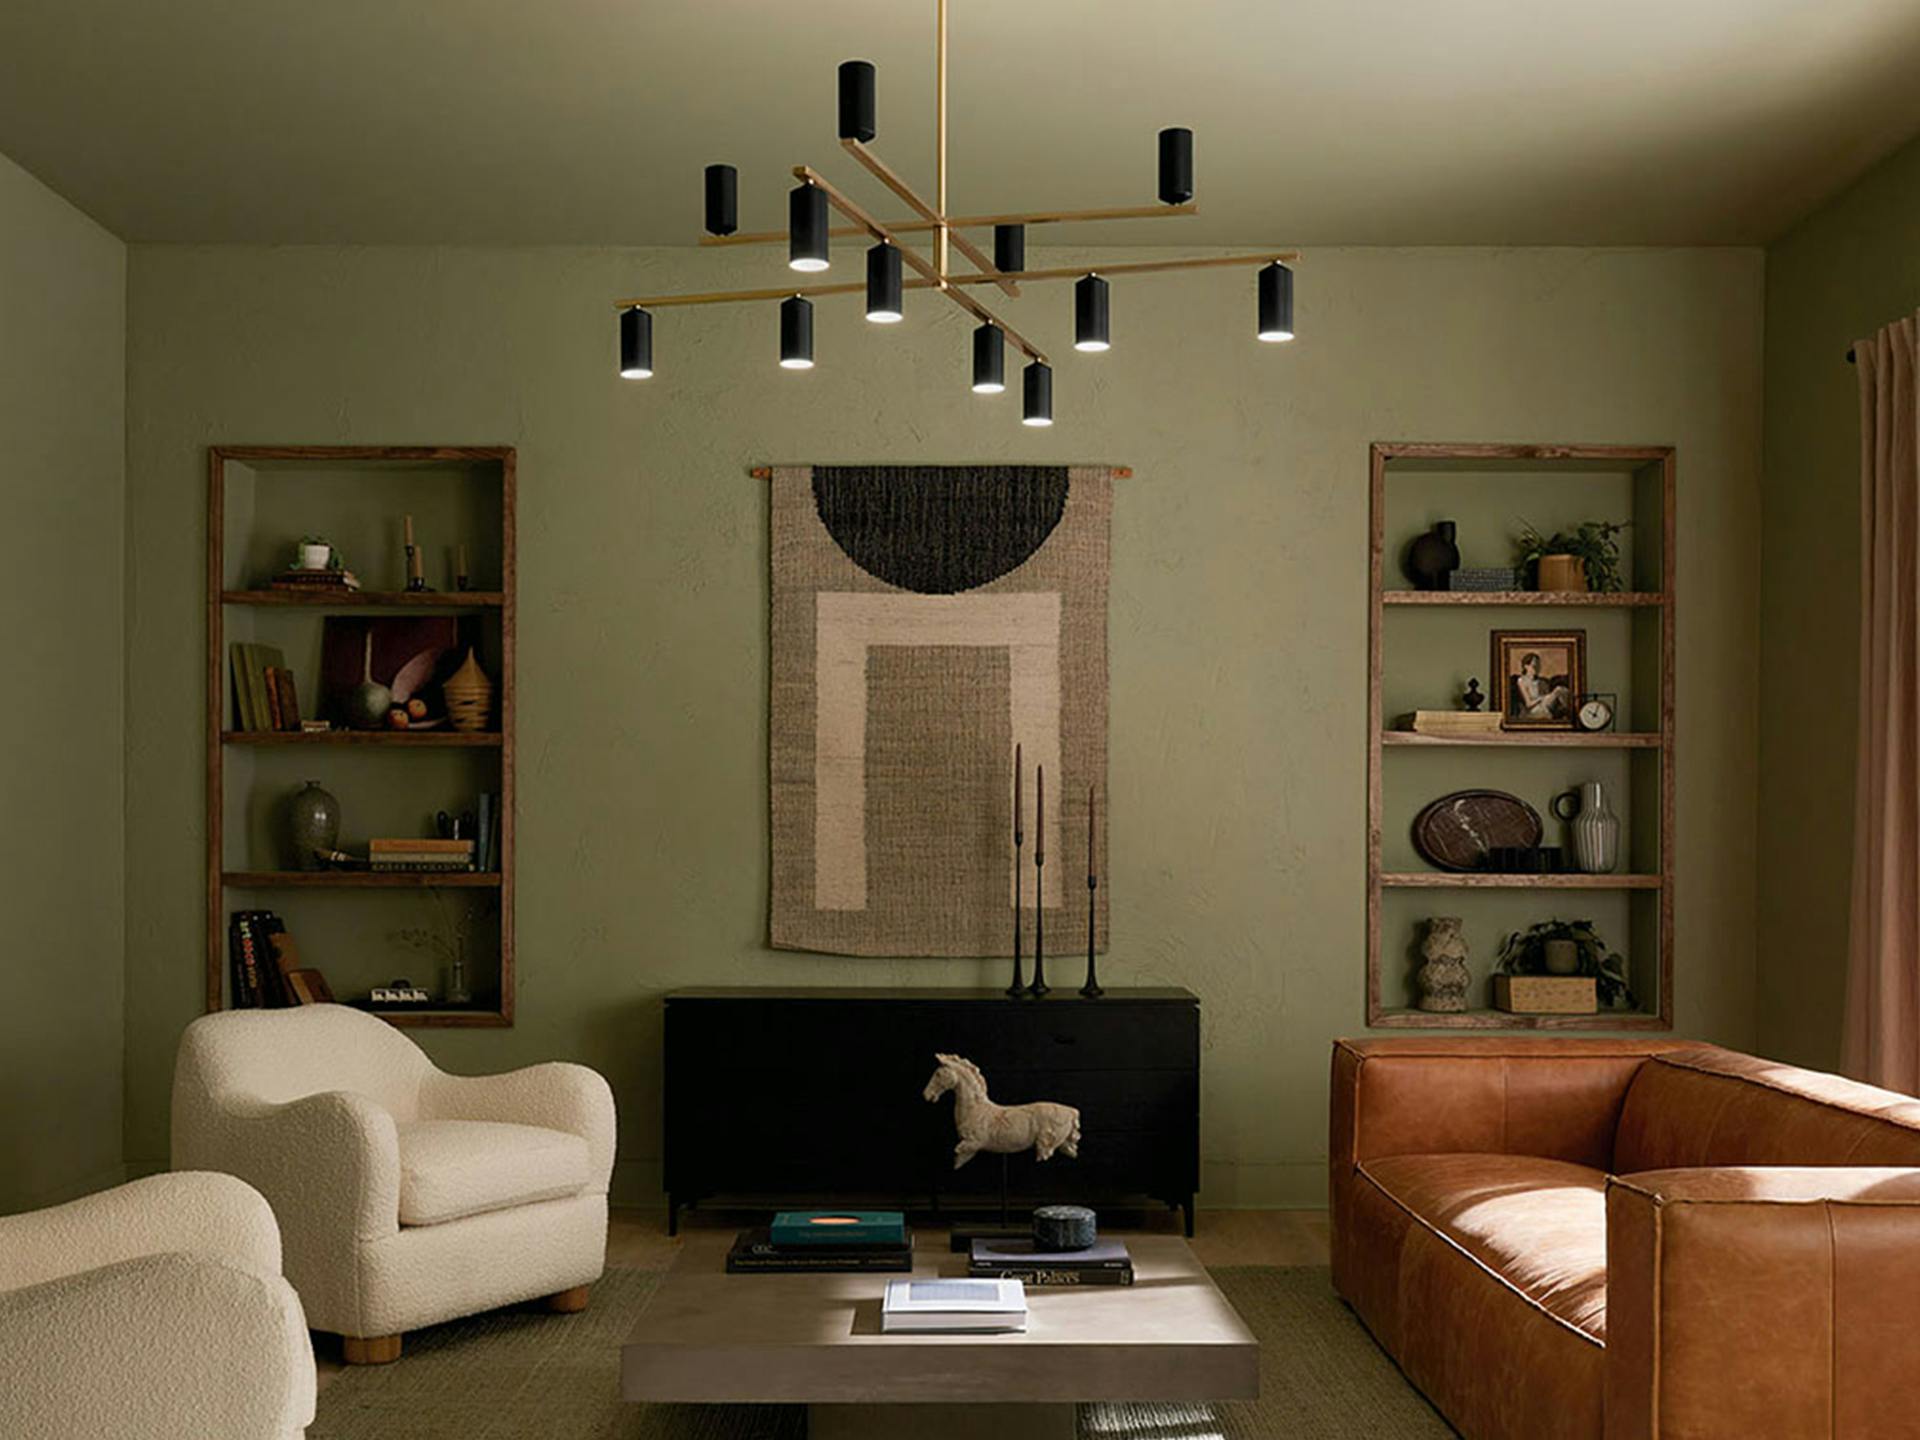 12 light Gala Chandelier hanging over the coffee table of a green modern styled living room